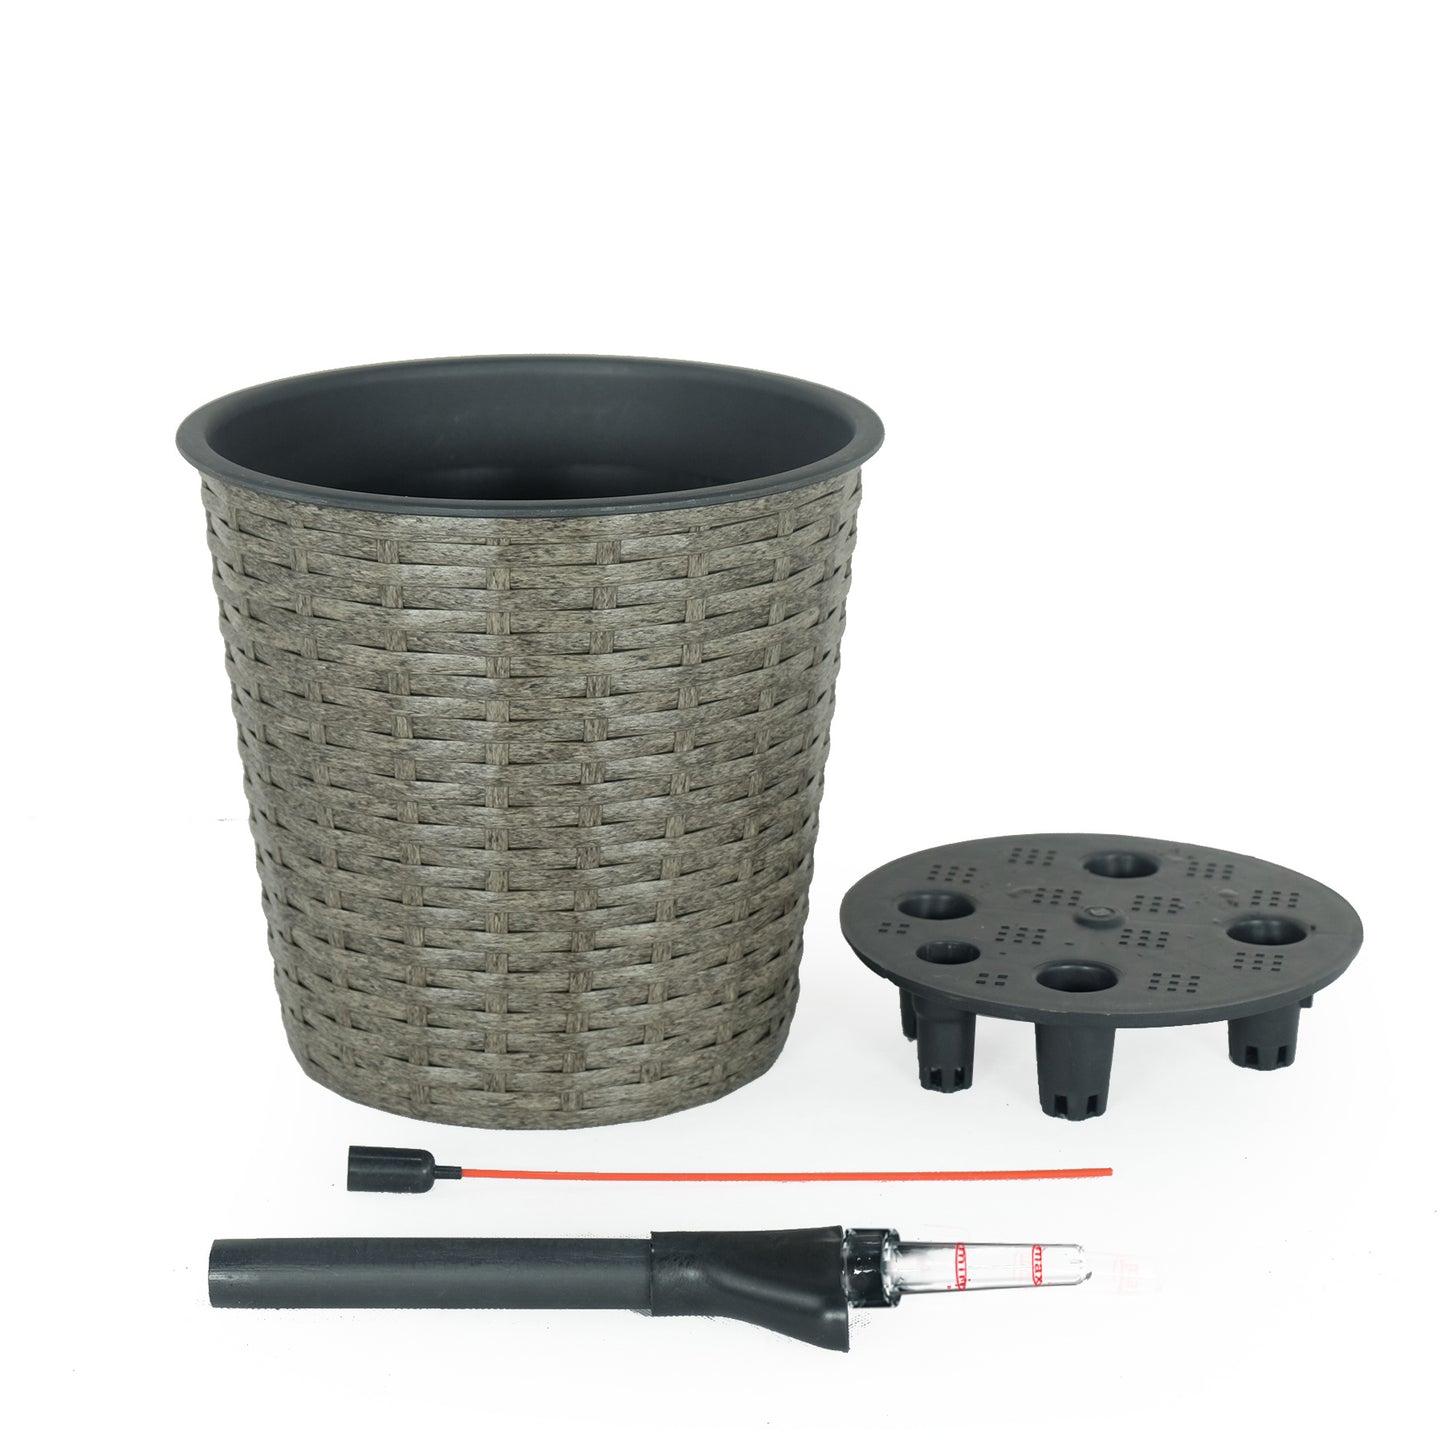 10.2" Self-watering Wicker Decor Planter for Indoor and Outdoor - Round - Grey